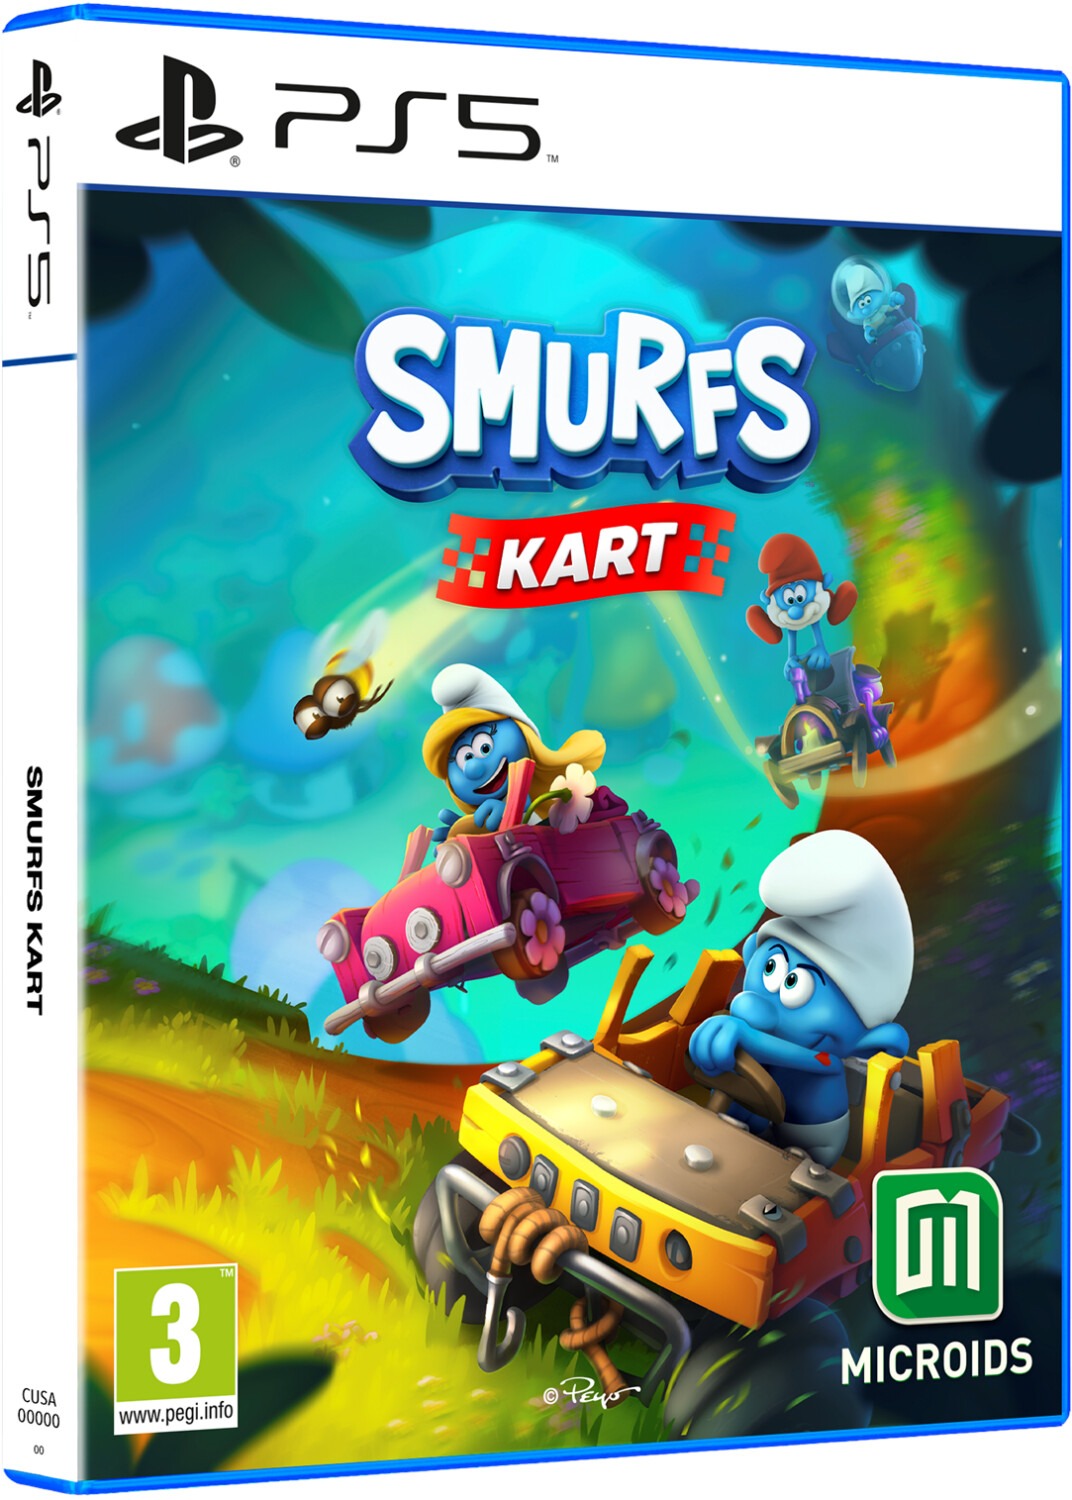 Photos - Game Microids The Smurfs: Kart (PS5)